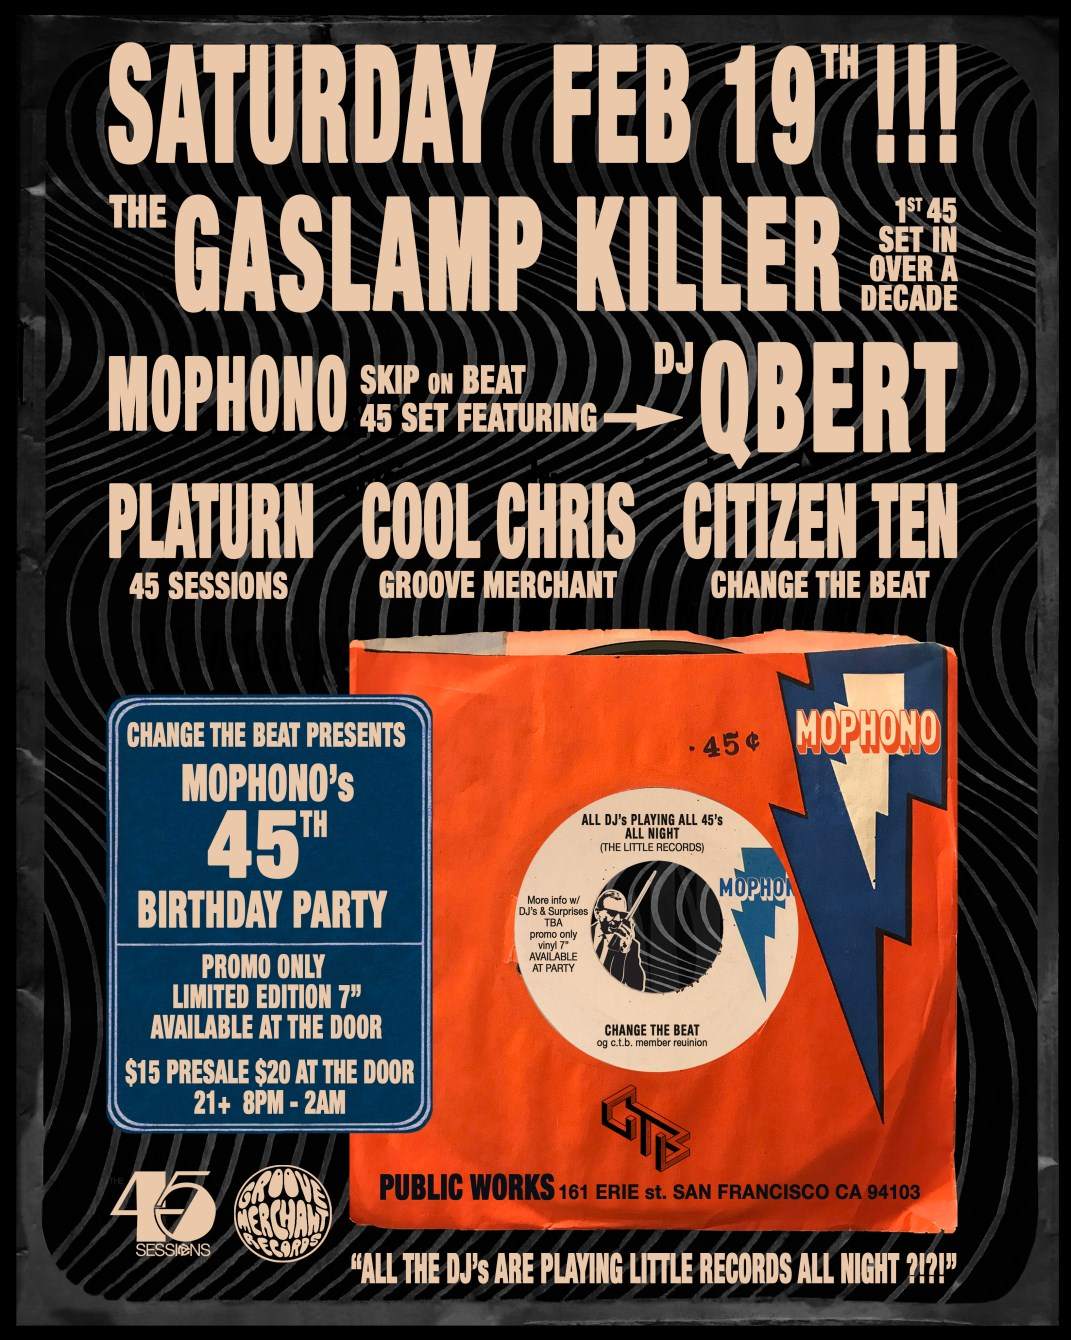 Mophono's 45th Birthday Party with The Gaslamp Killer, DJ Qbert, & More - フライヤー表